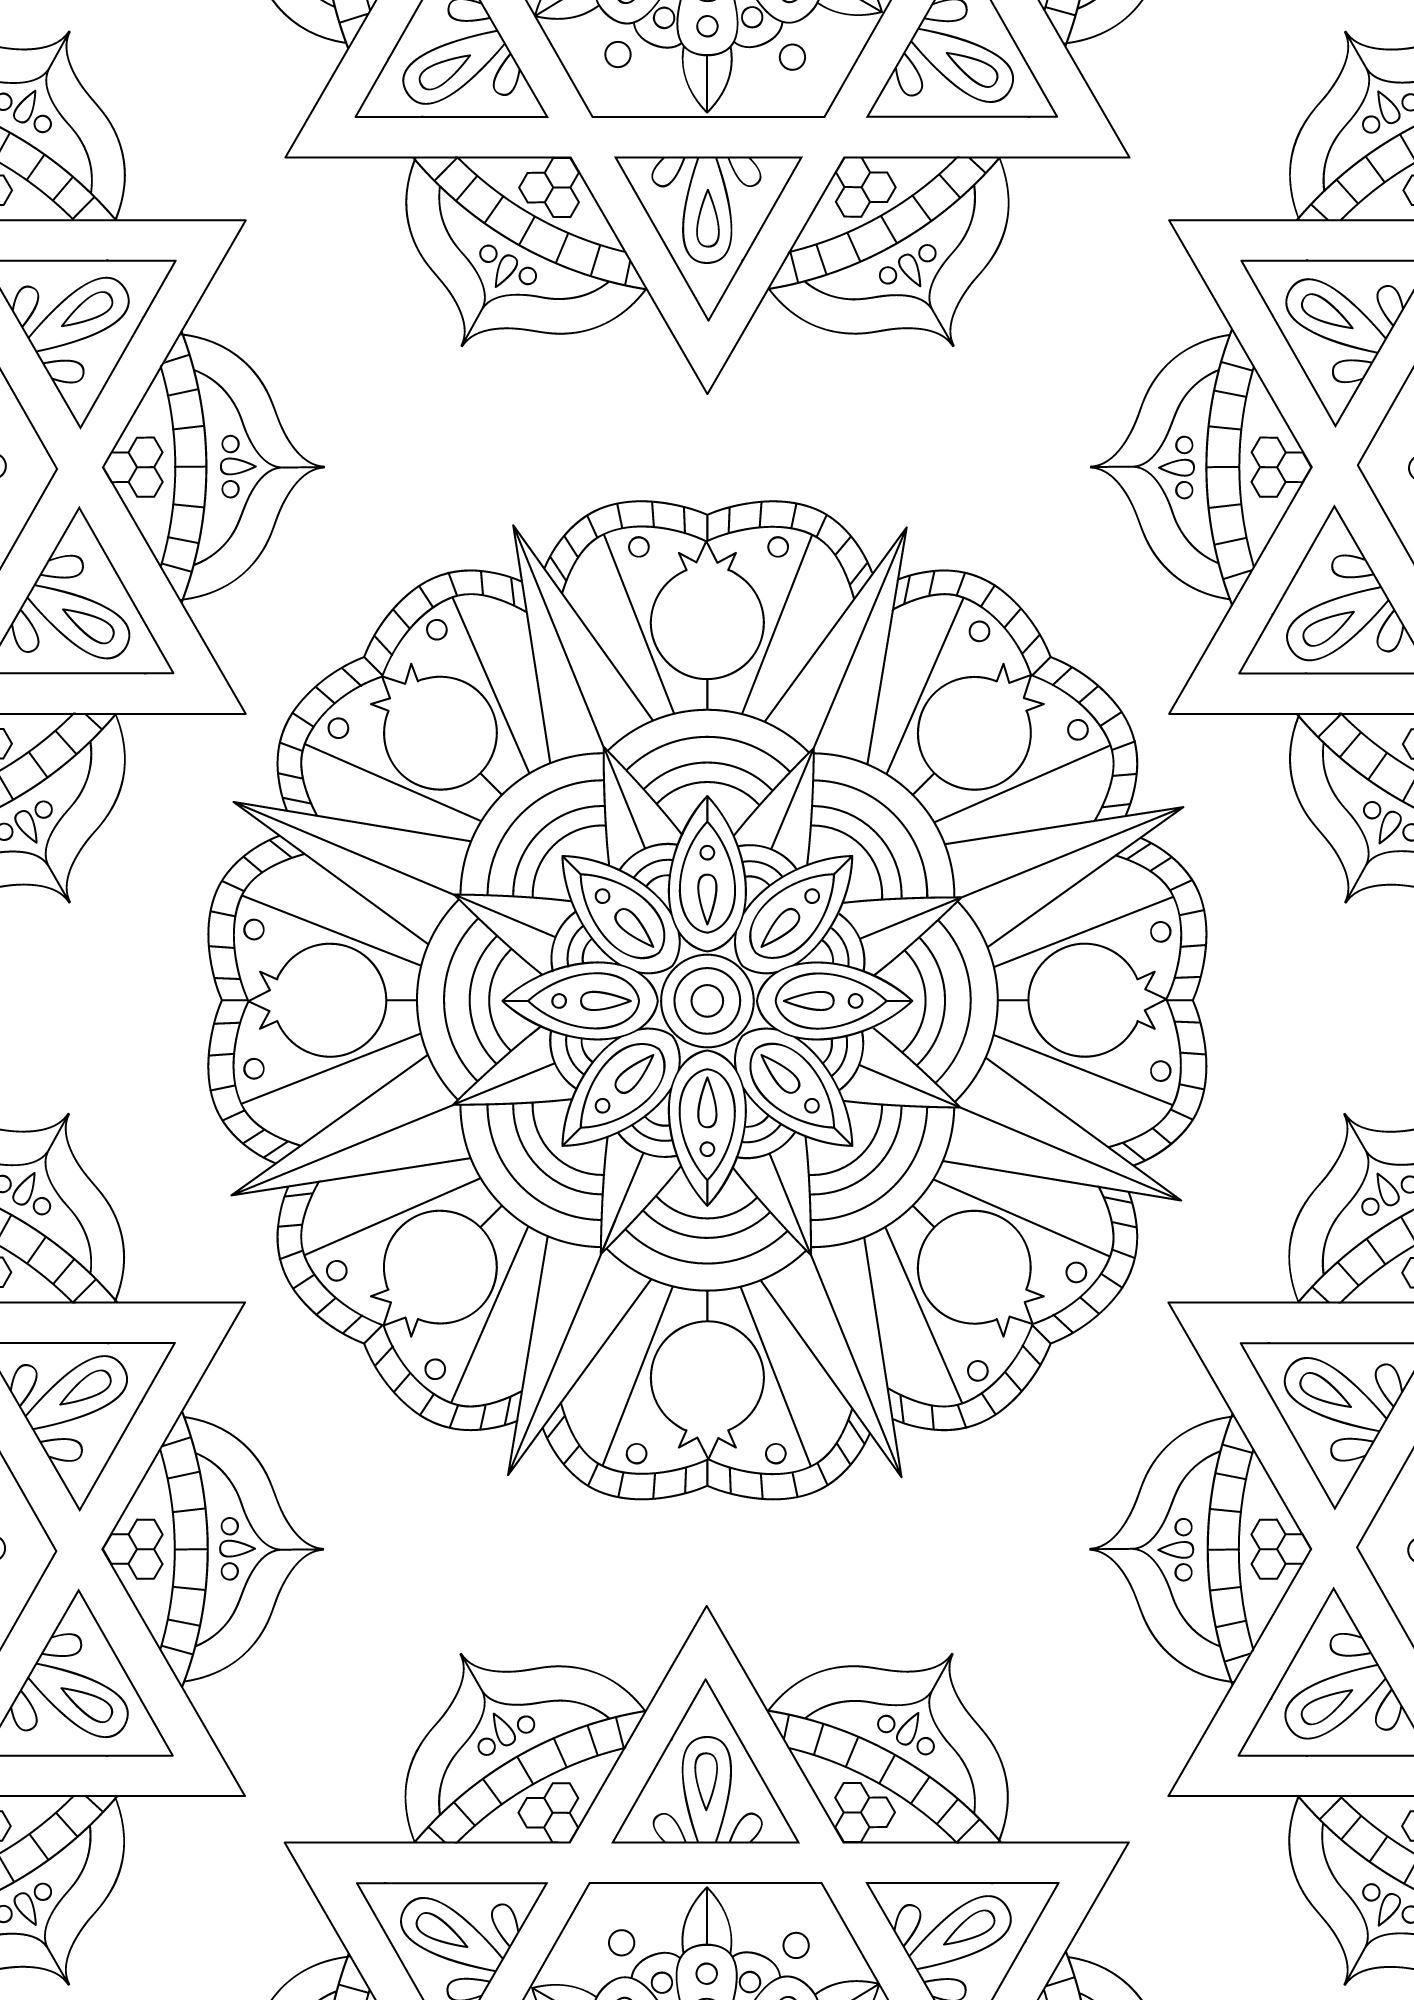 Full-page Mandala to Color